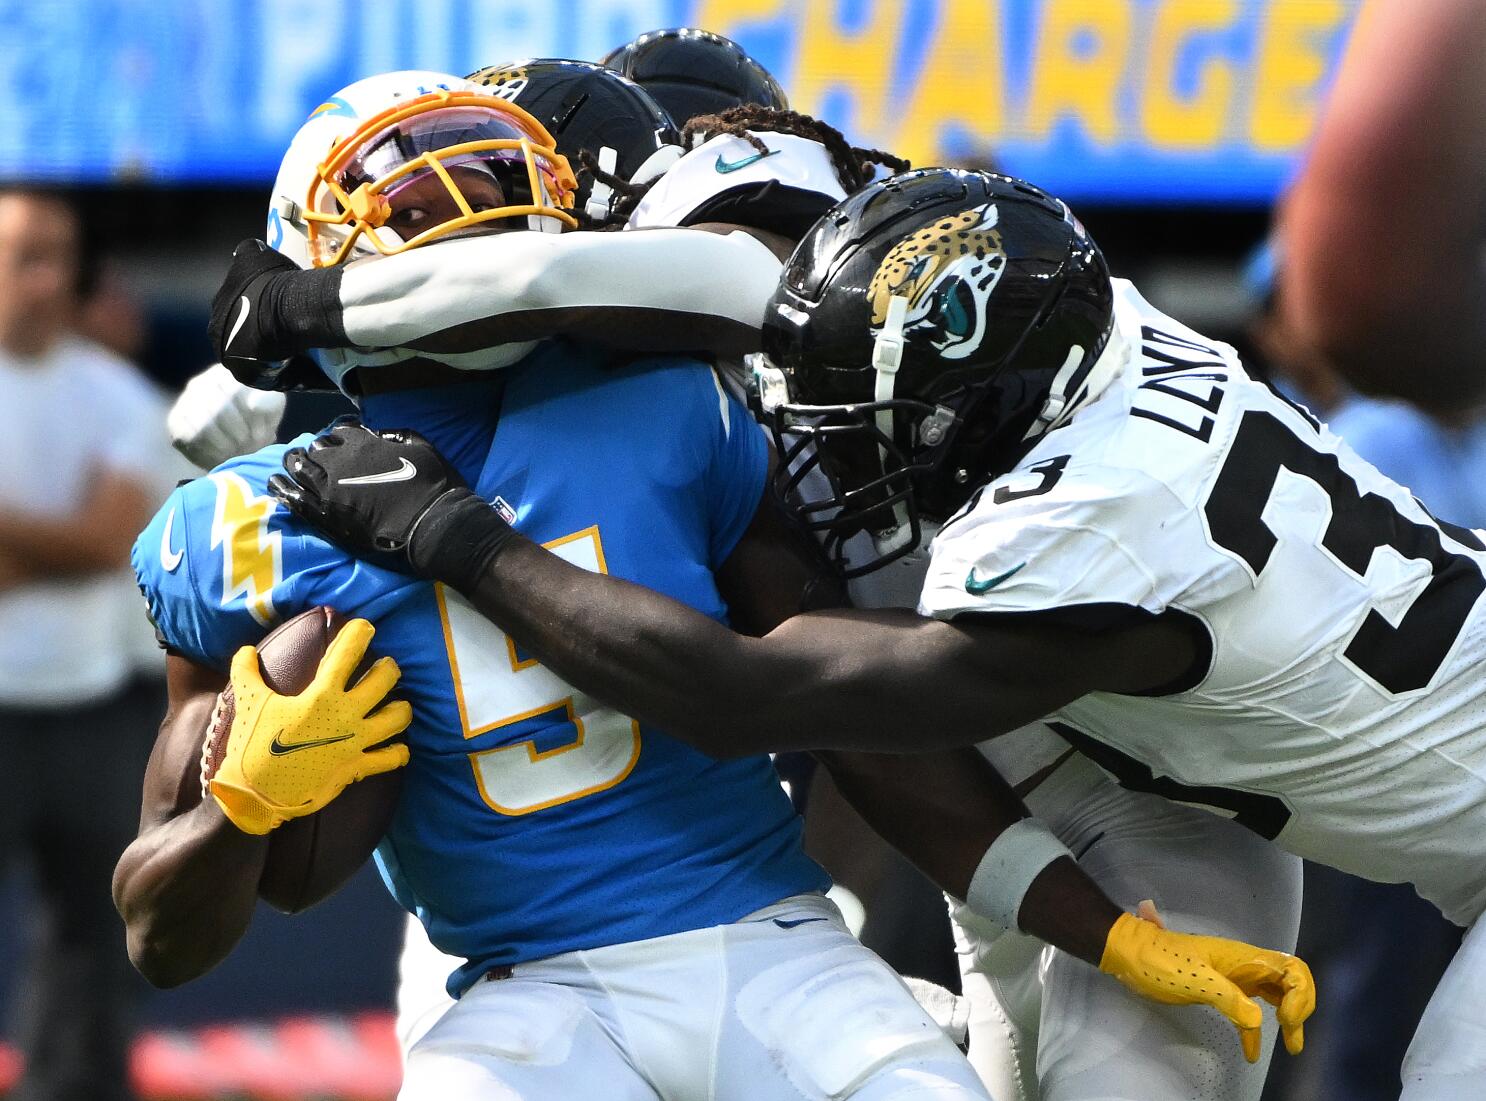 How to Watch Jaguars vs. Chargers on September 25, 2022